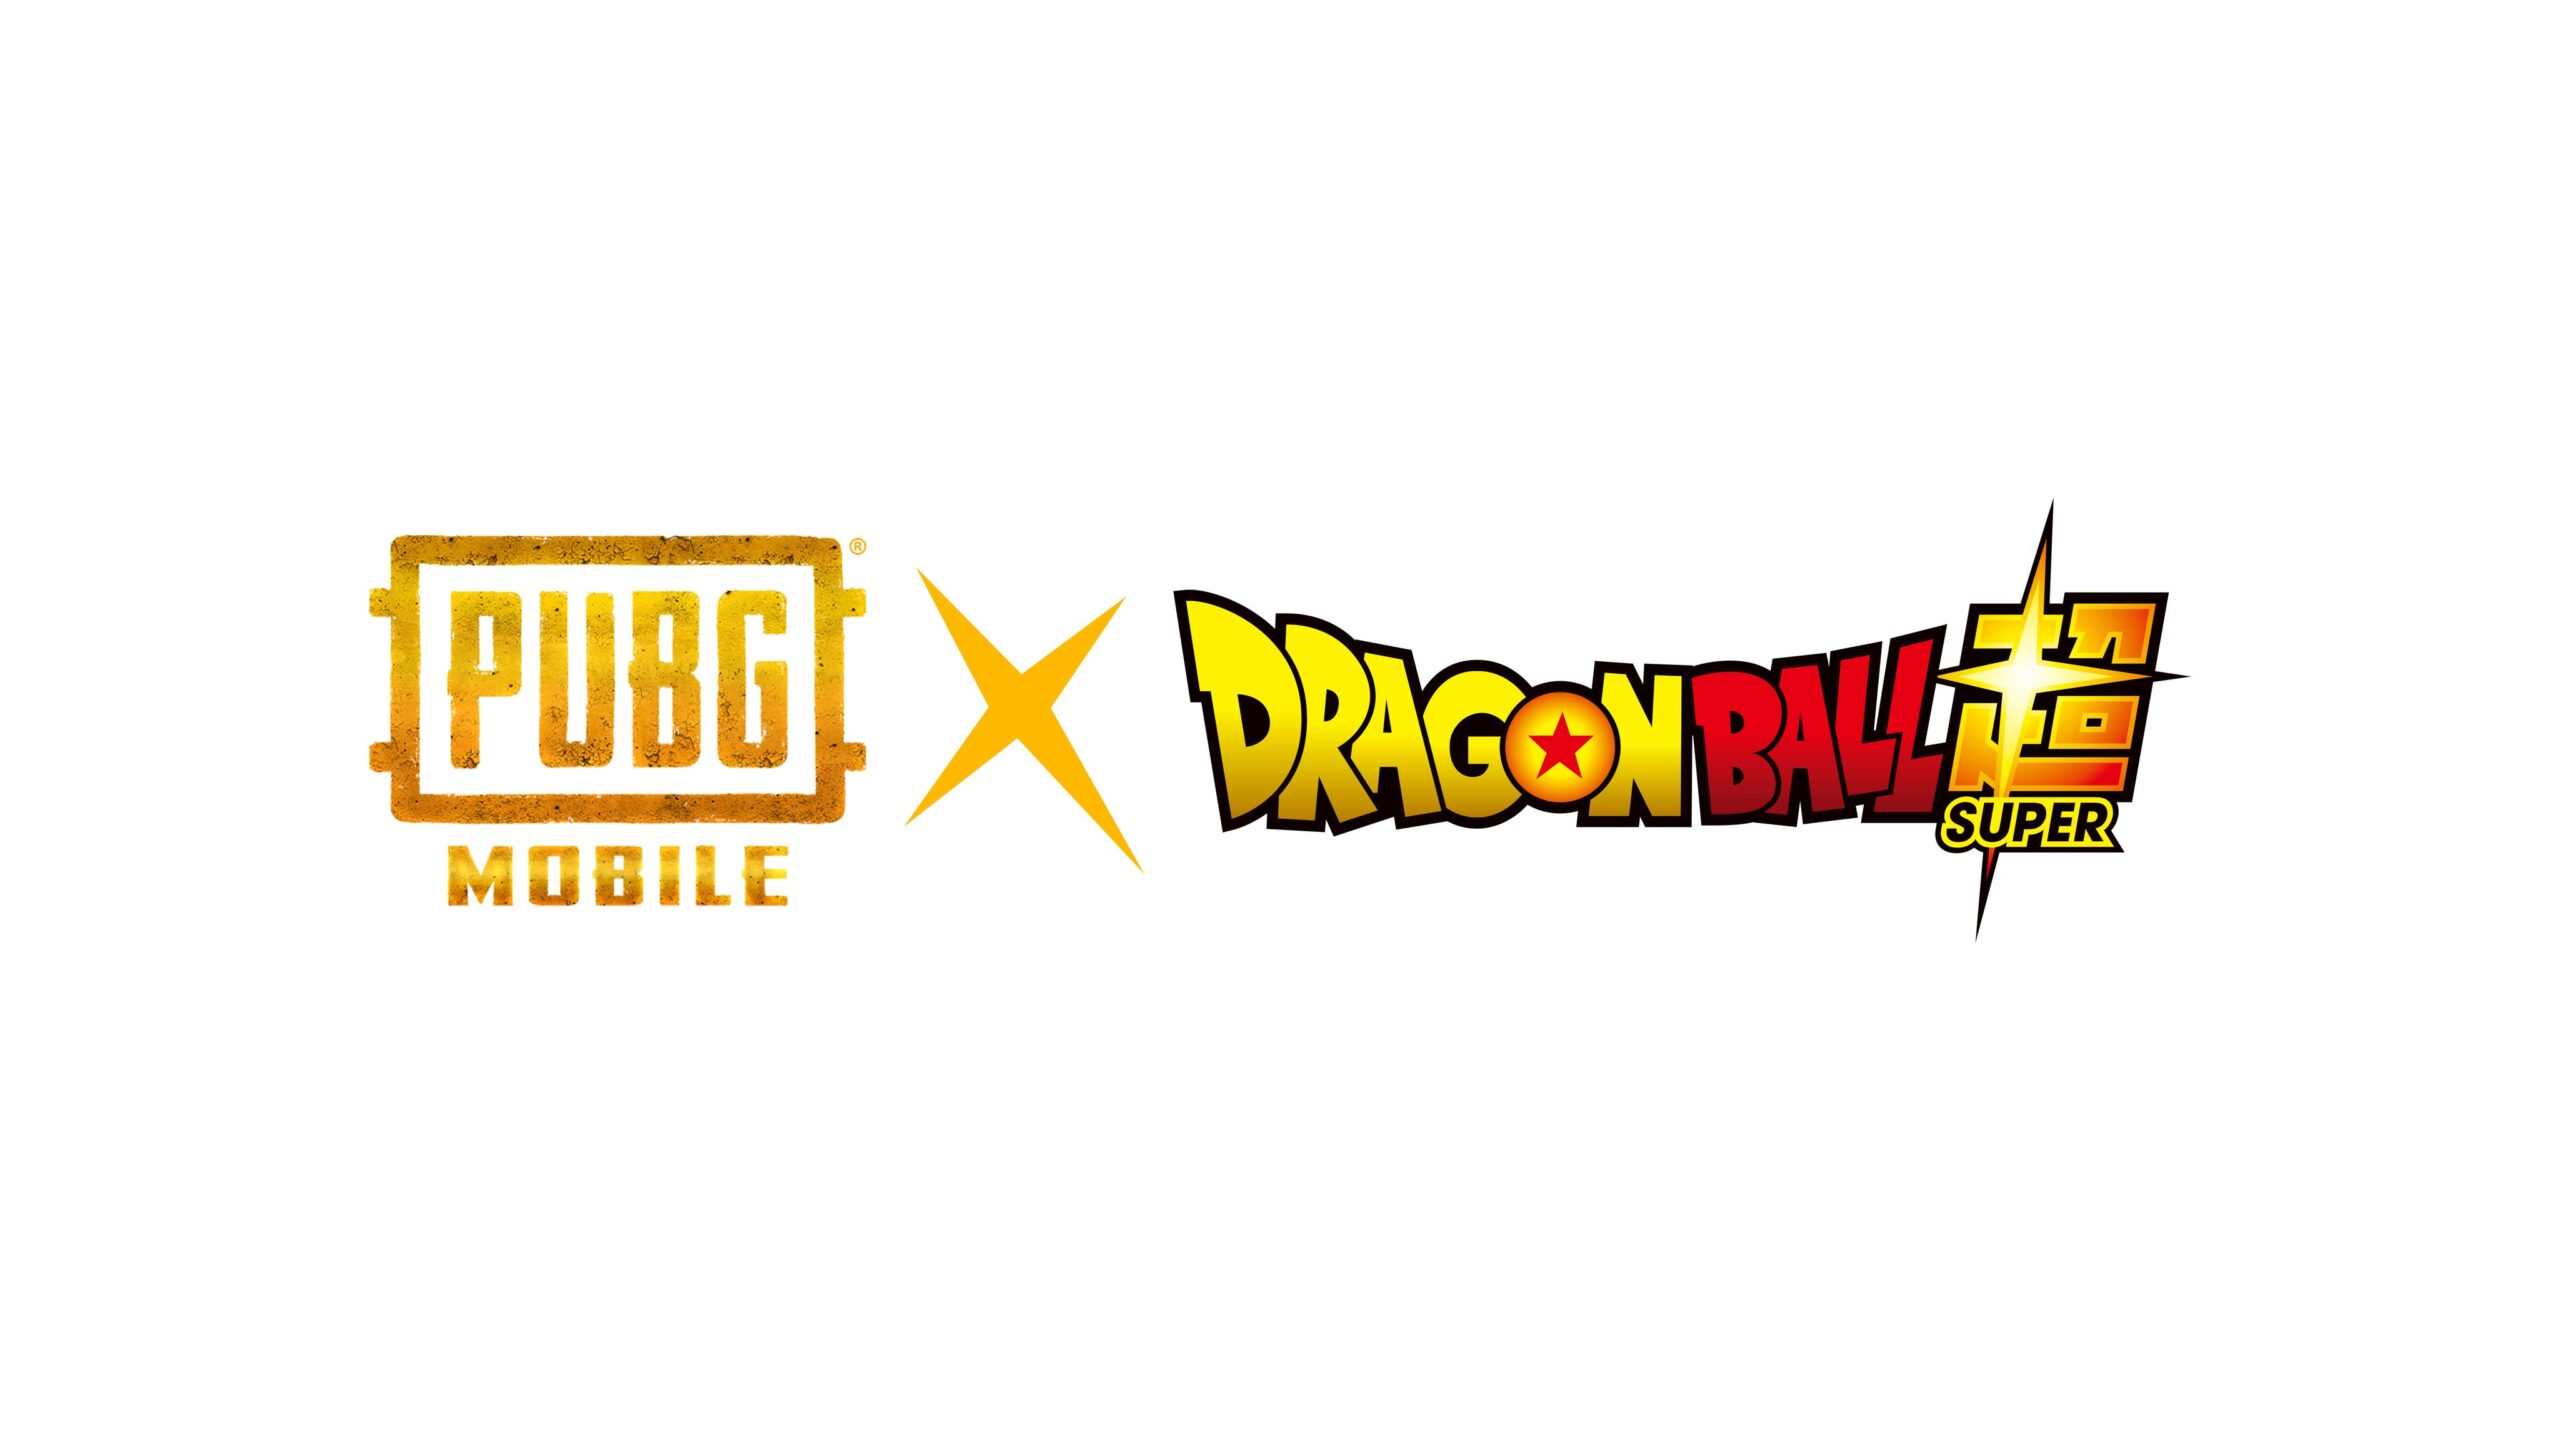 PUBG Mobile is also getting a Dragon Ball crossover event